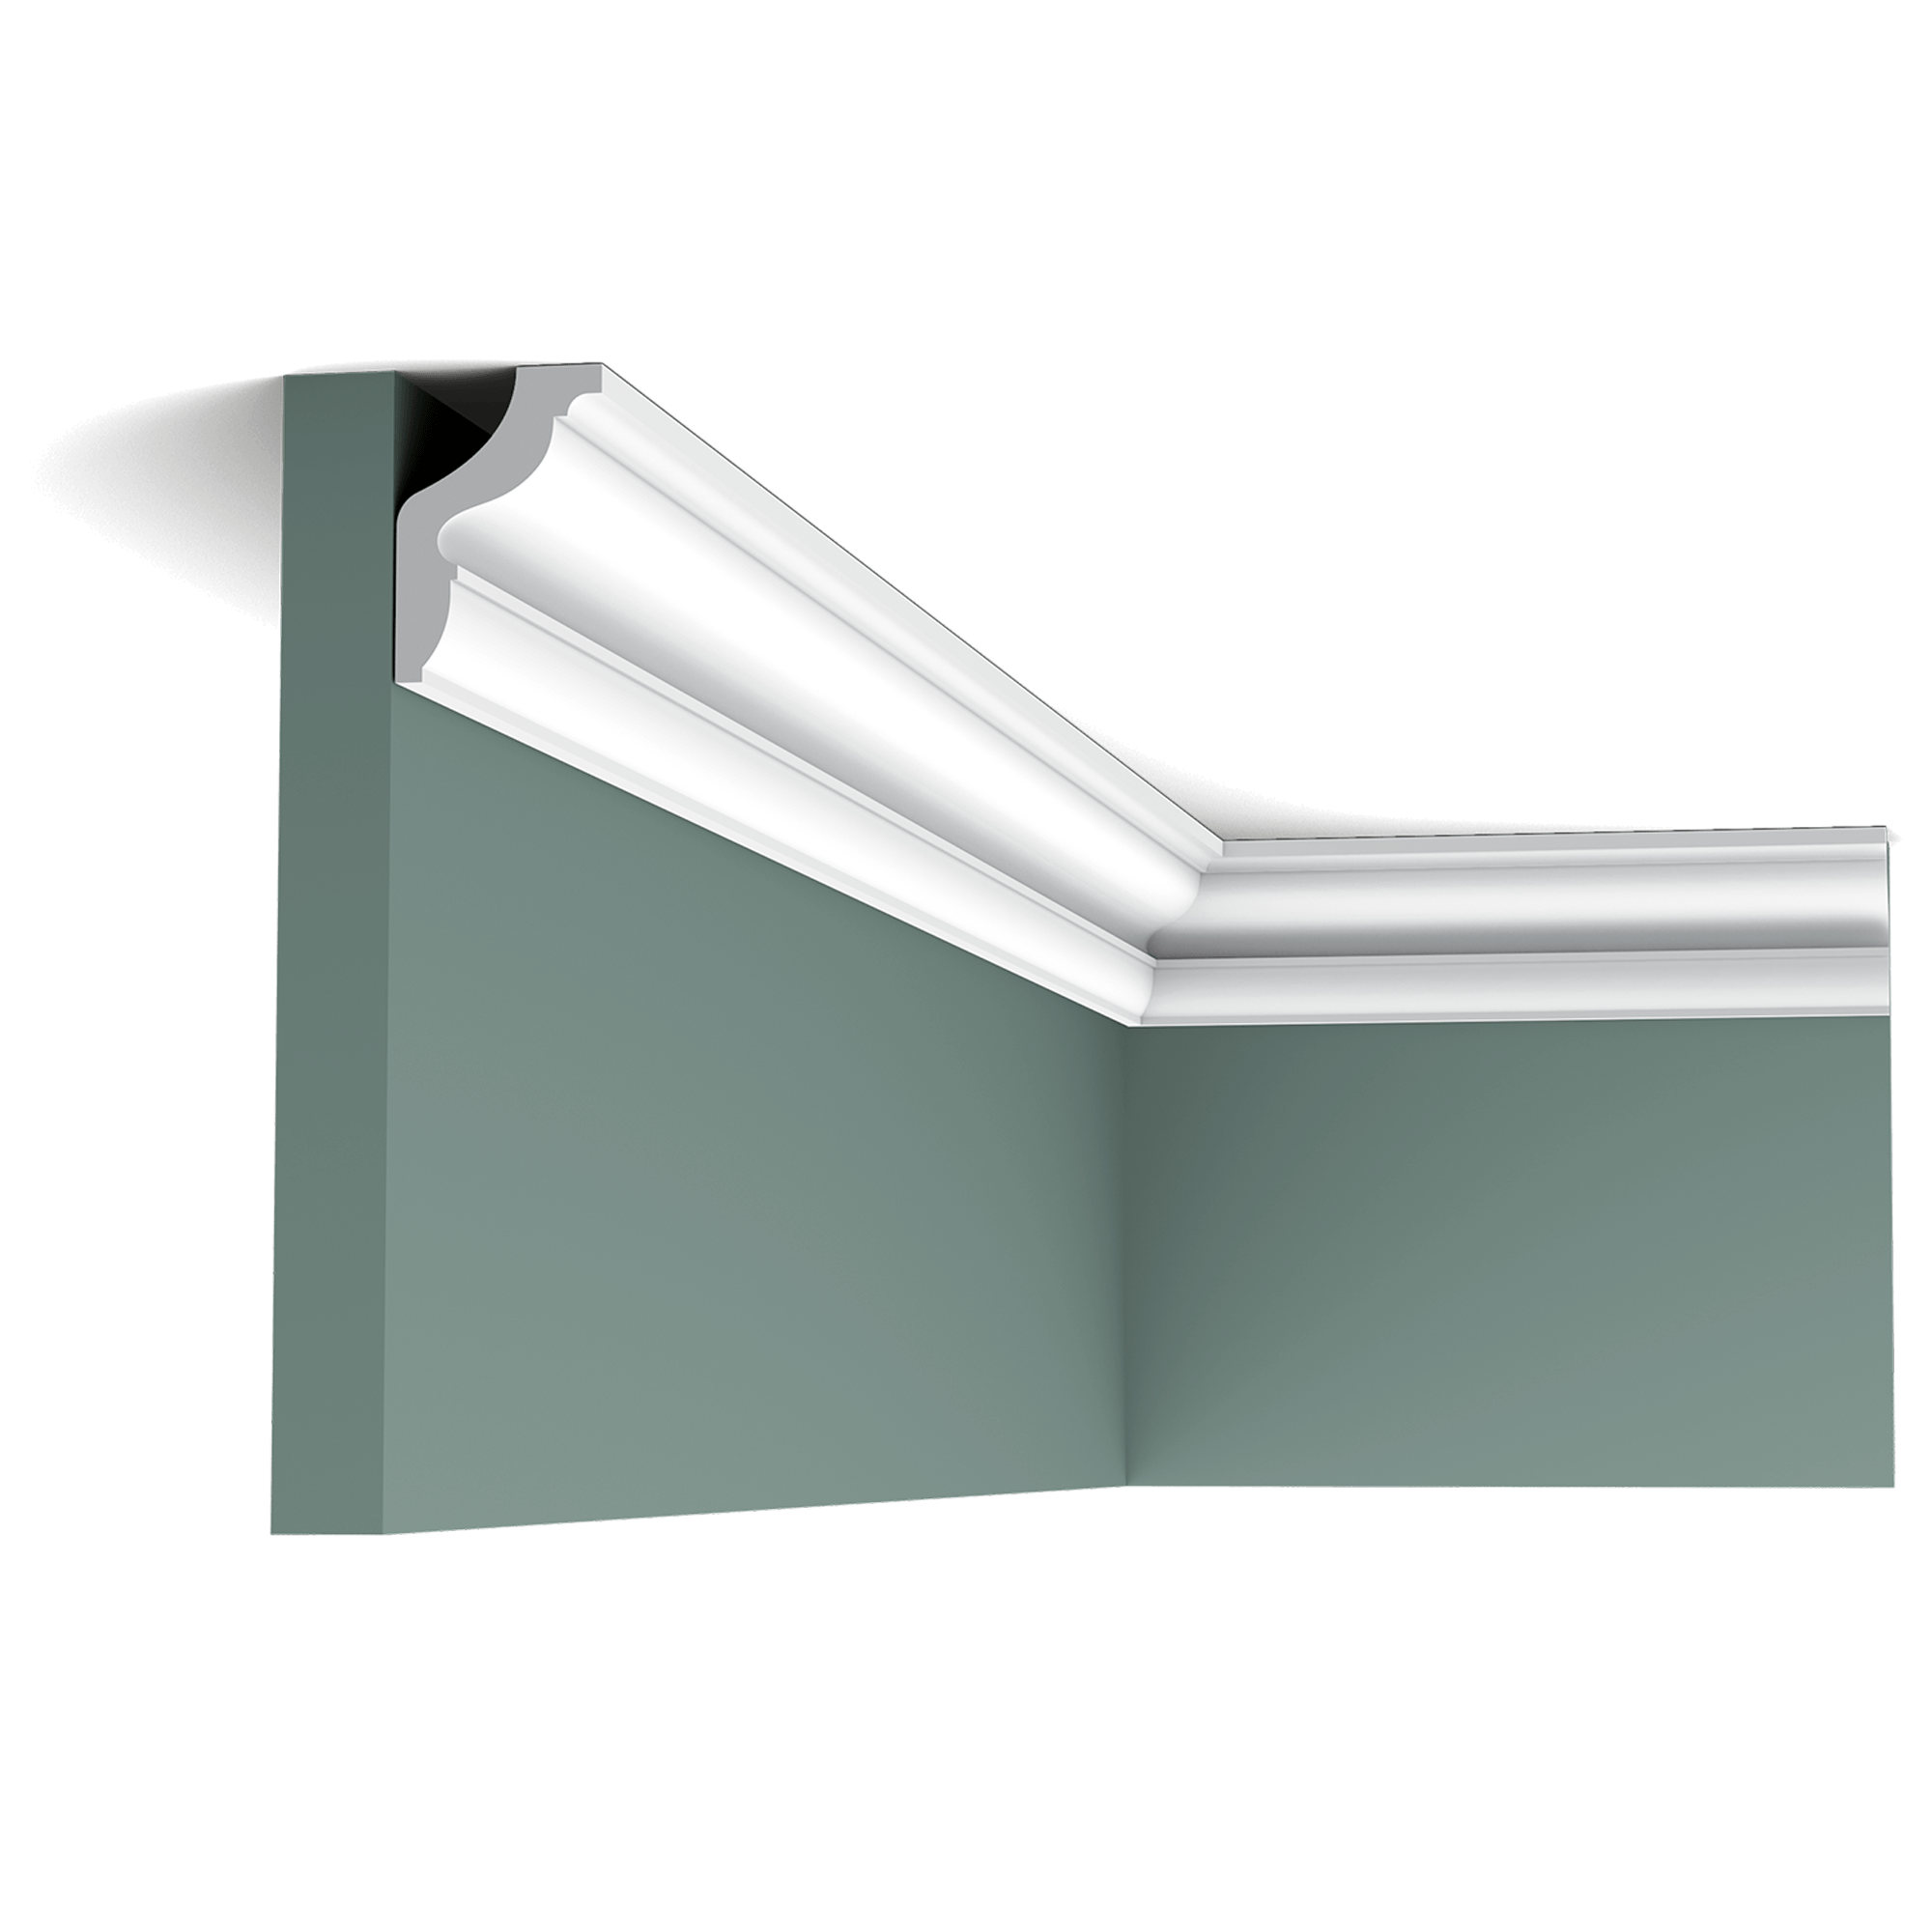 This classic moulding with multiple cyma recta curves creates the perfect transition from wall to ceiling.